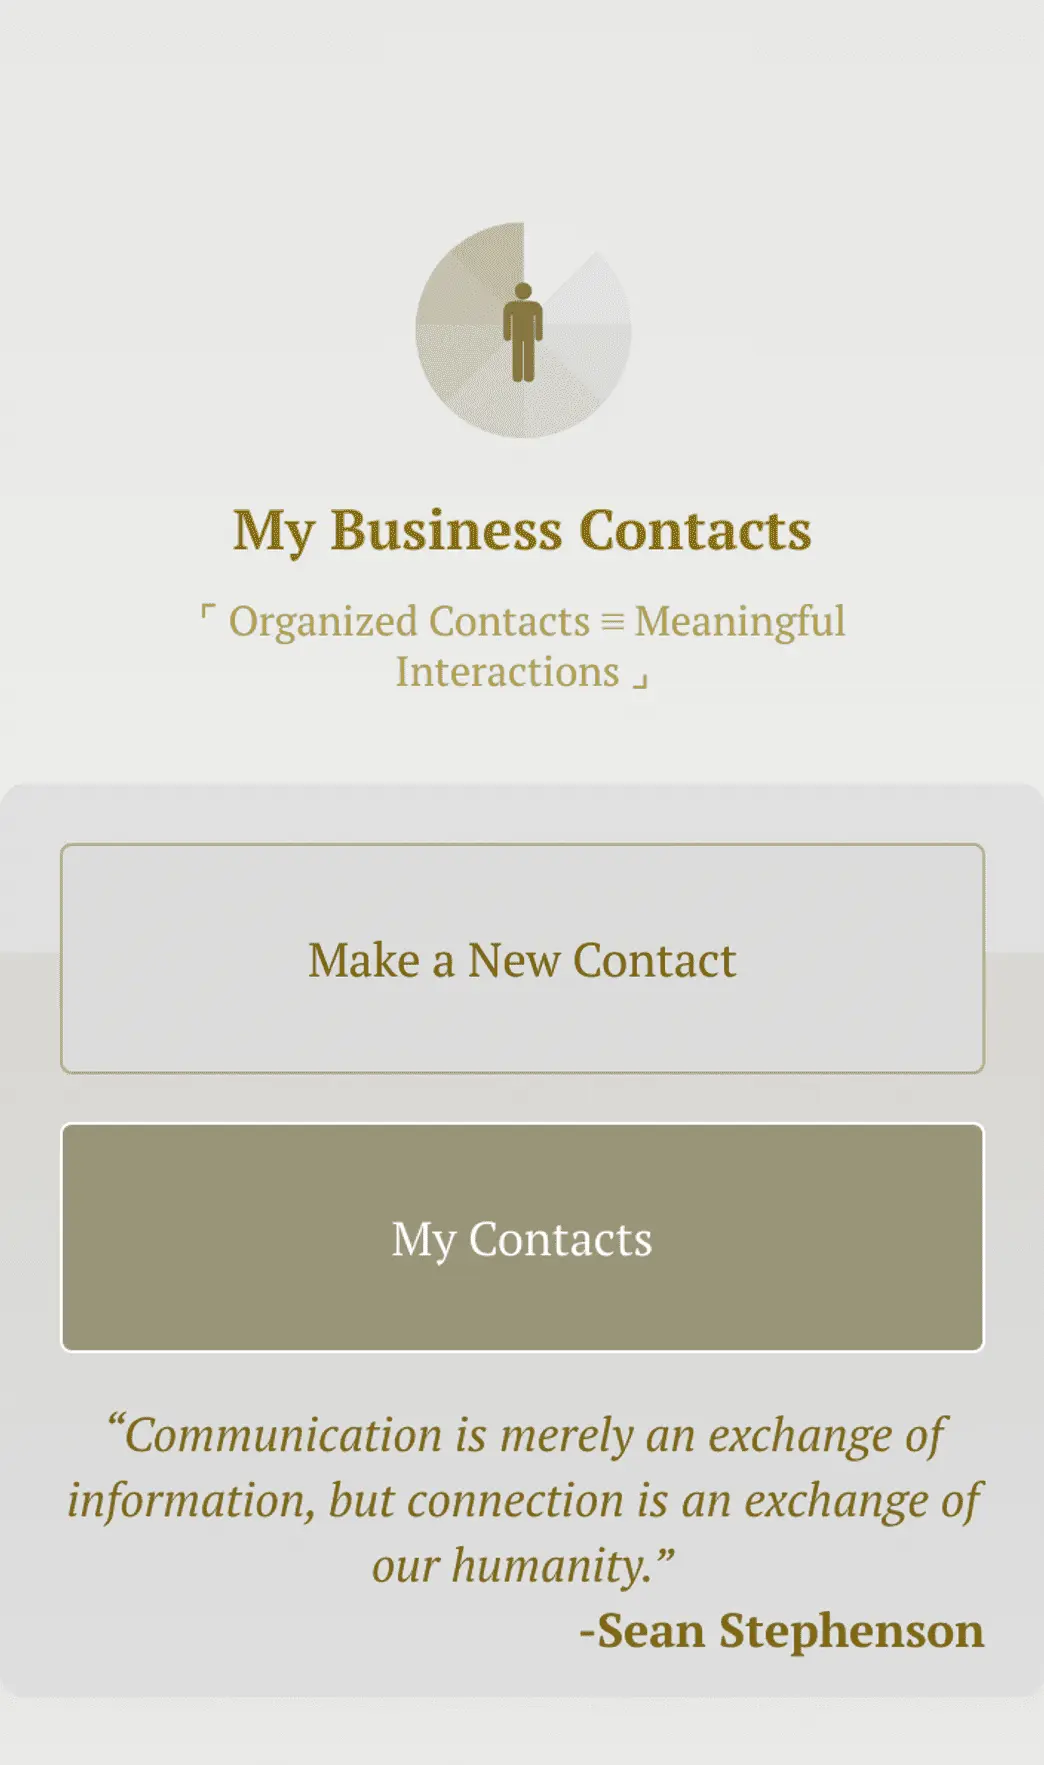 Business Contact App